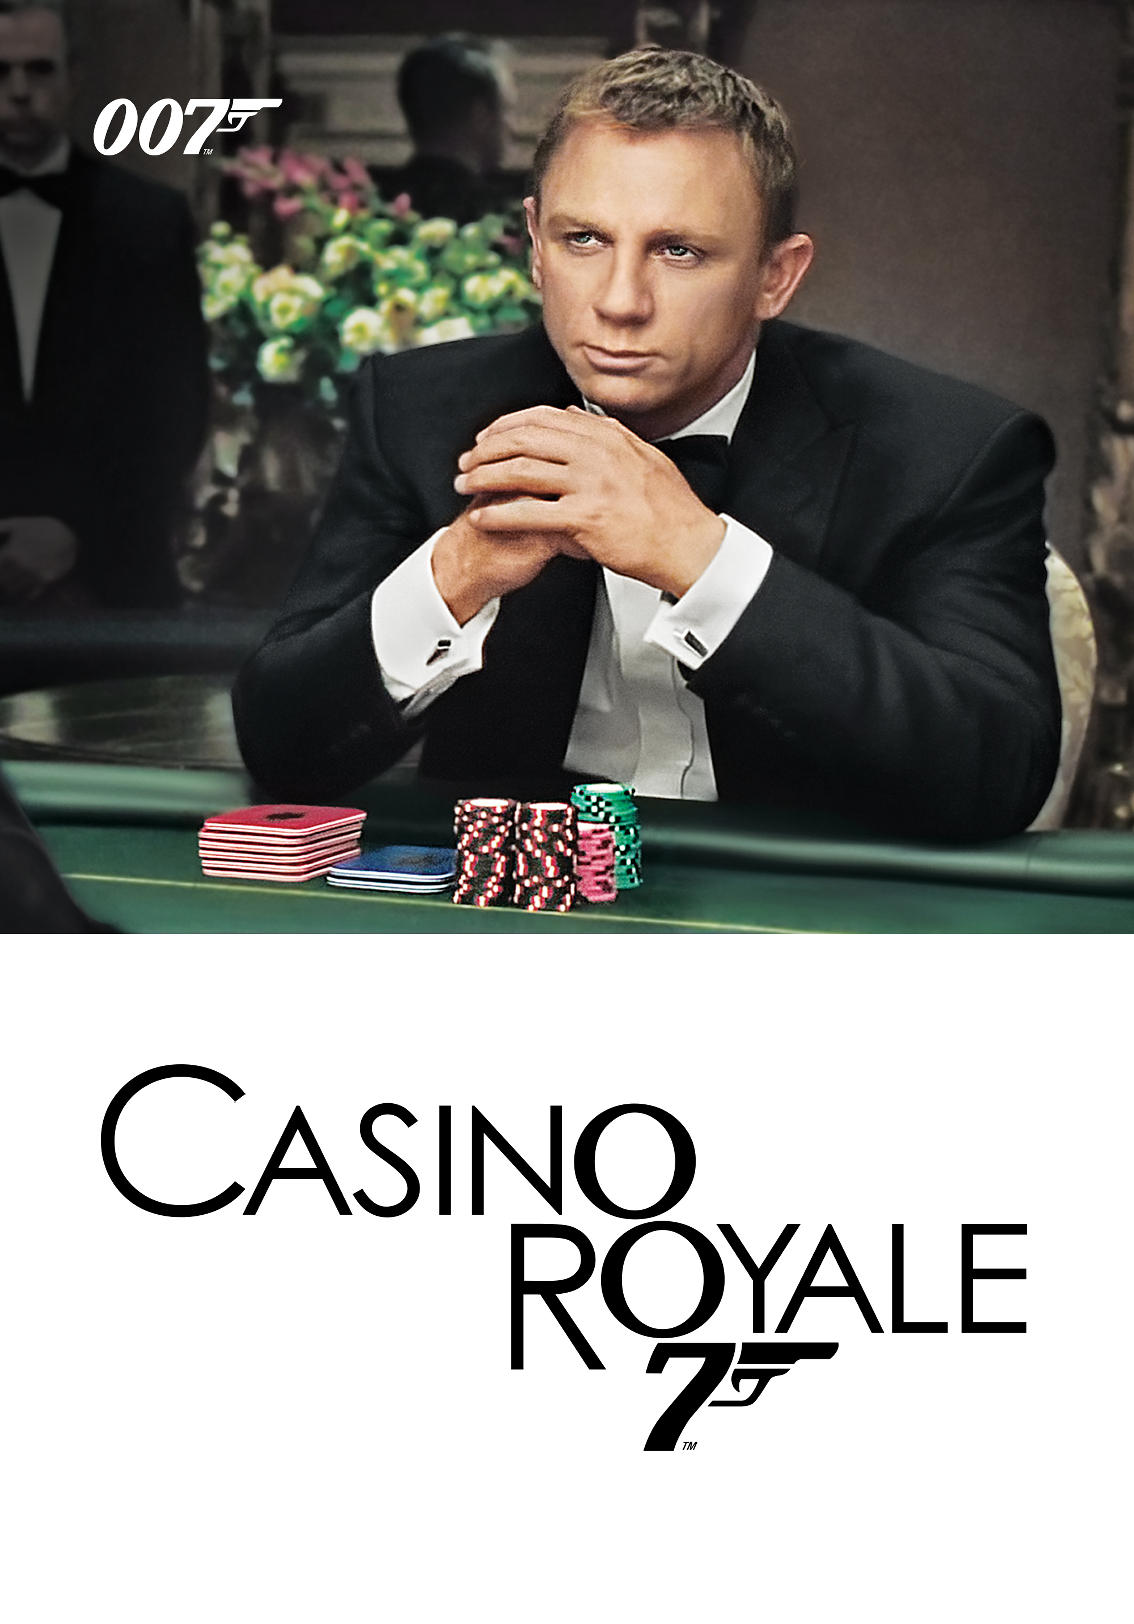 casino royale 2006 full movie download